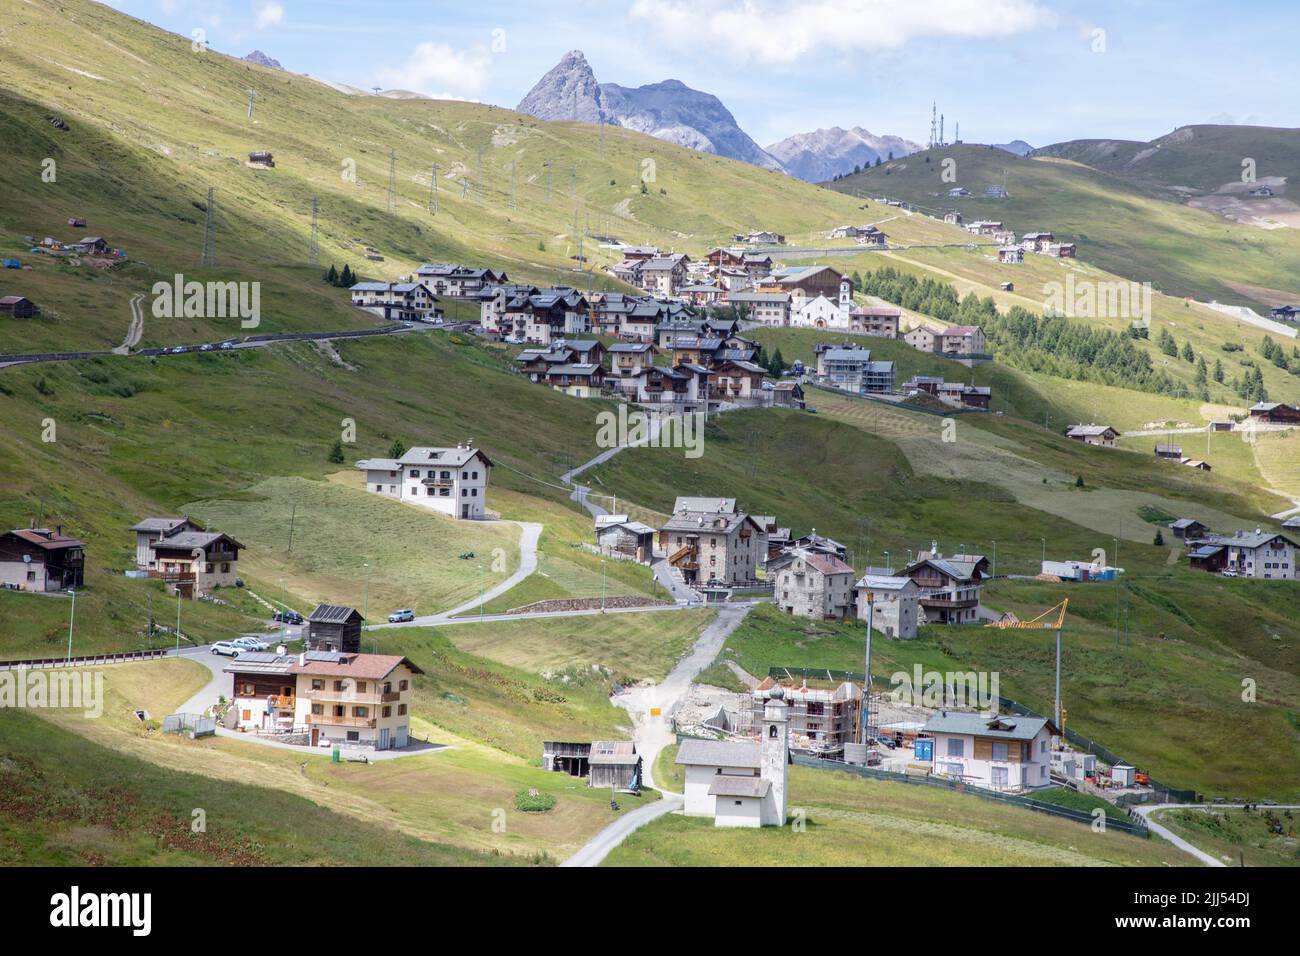 an amazing view of the beautiful Trepalle Village, on the way to Livigno, SO, Valtellina, Italy Stock Photo